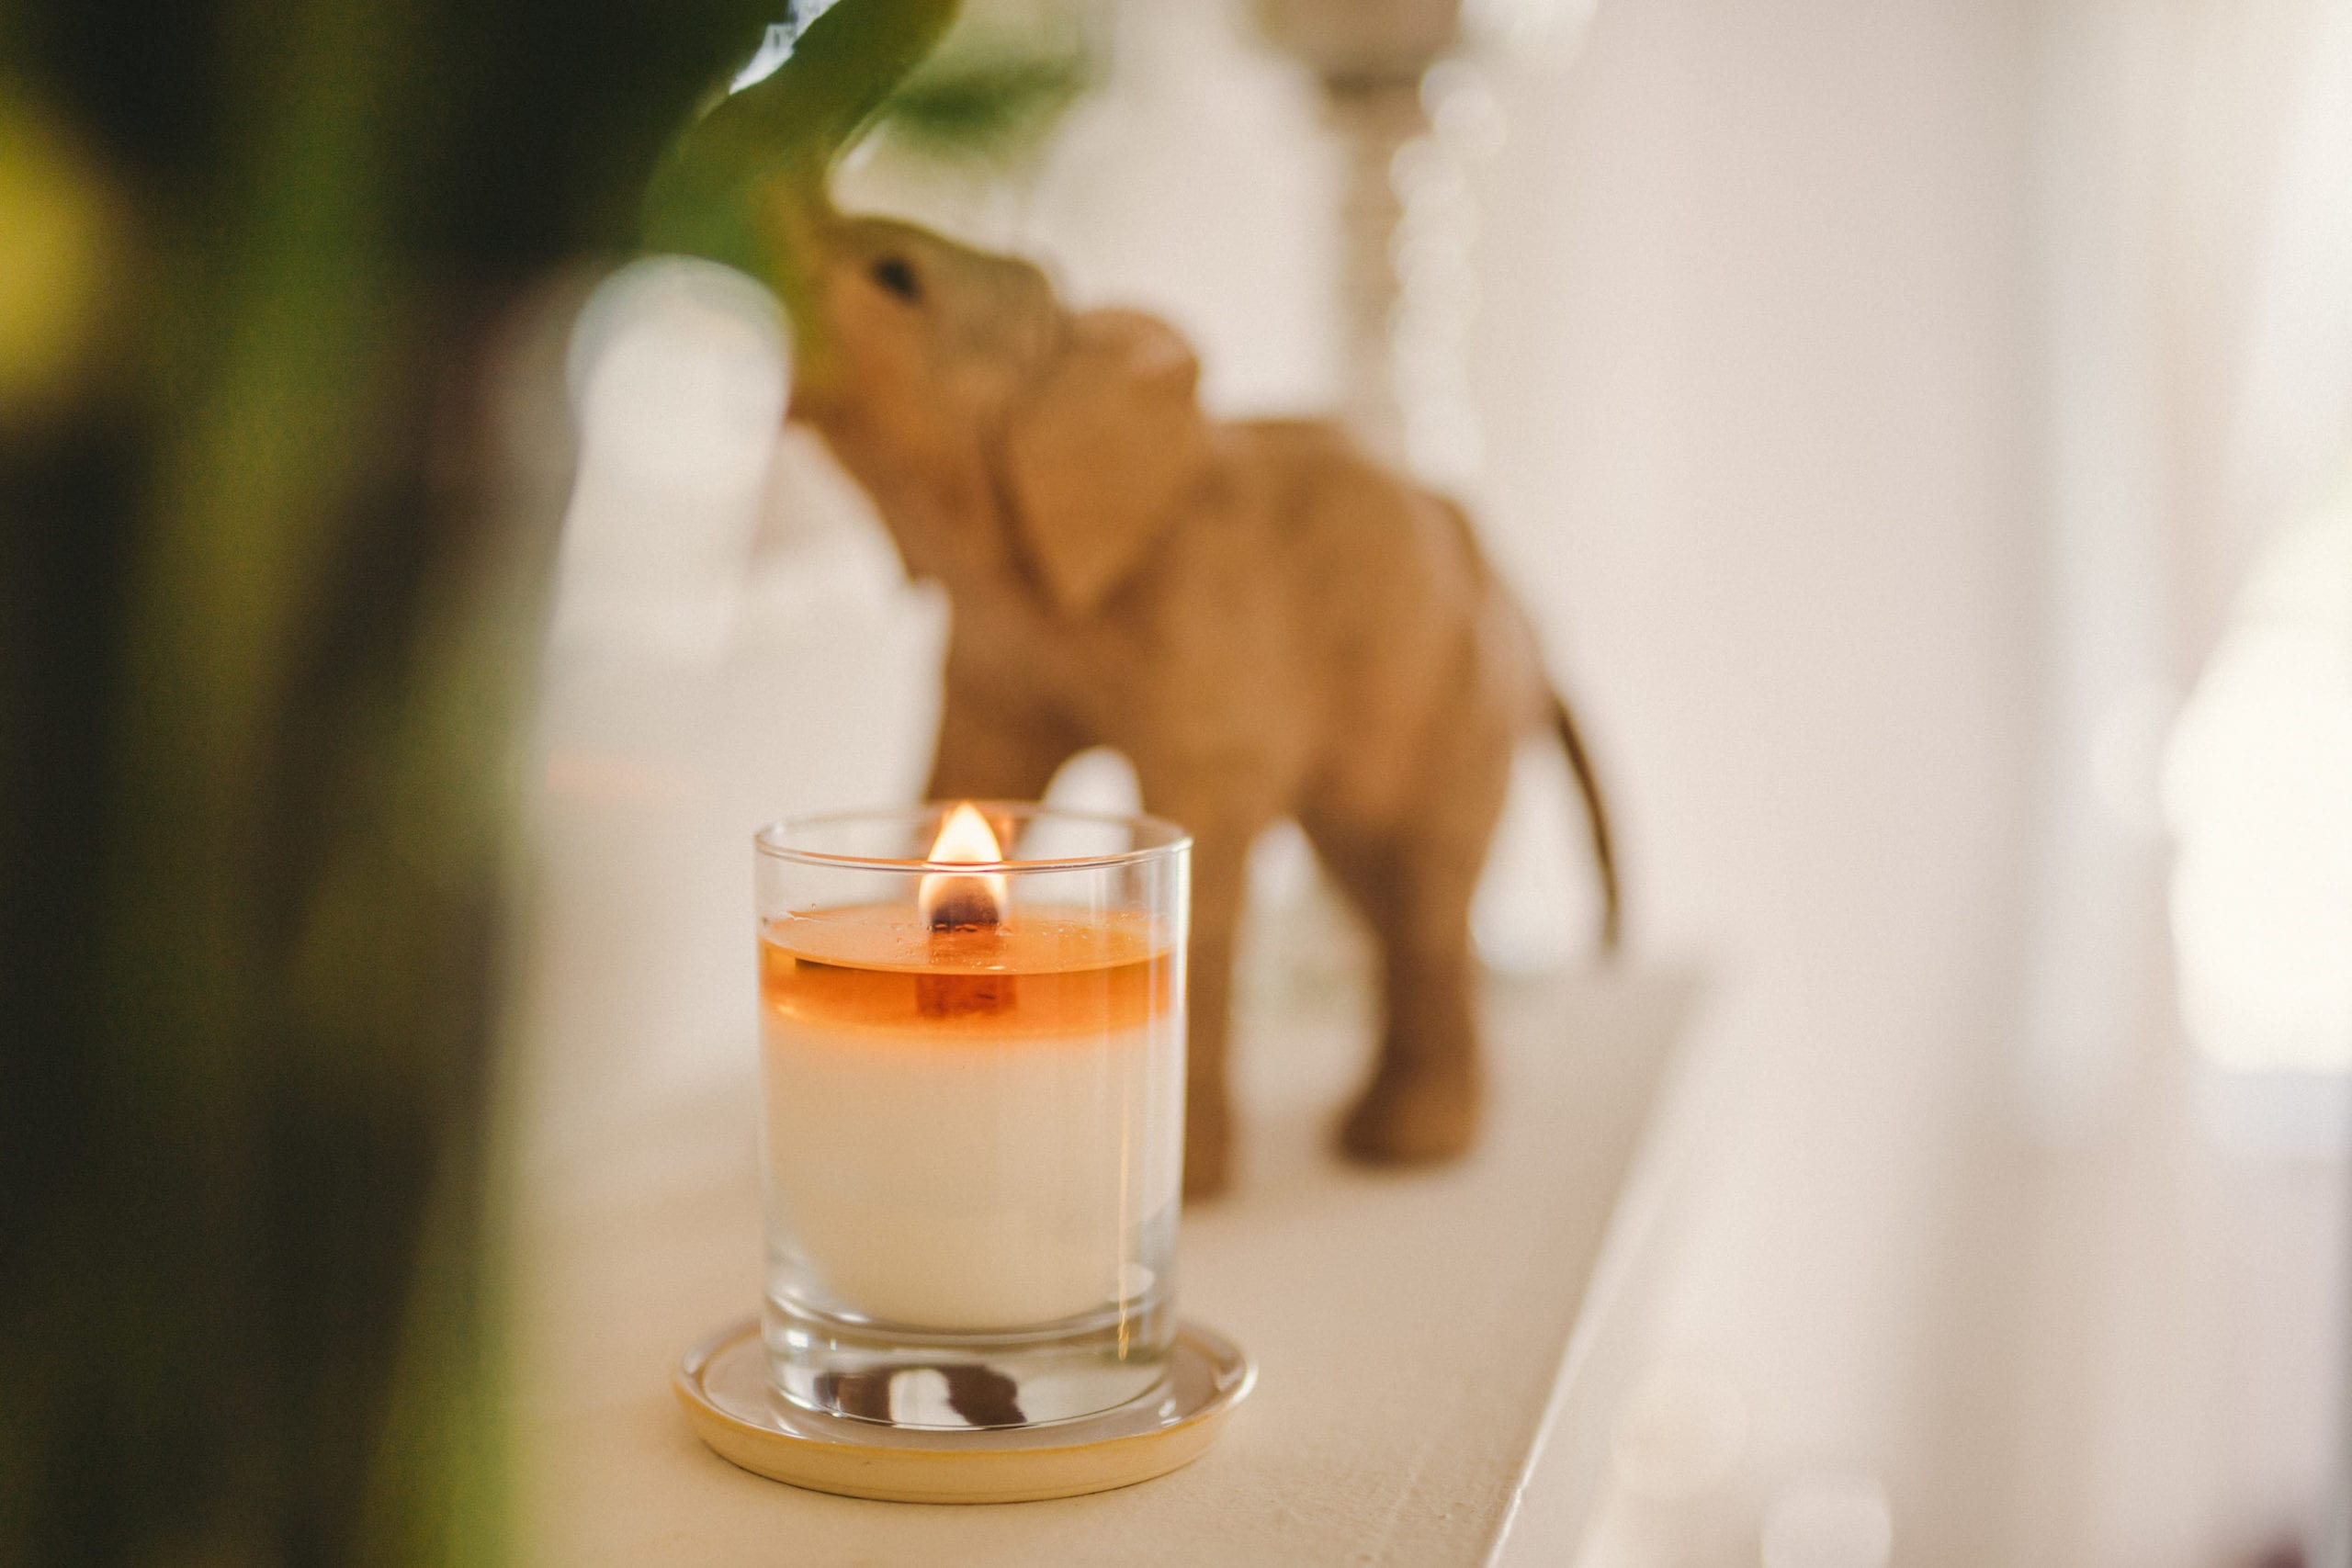 JSM Candle with orange liquid on shelf with elephant art in the background